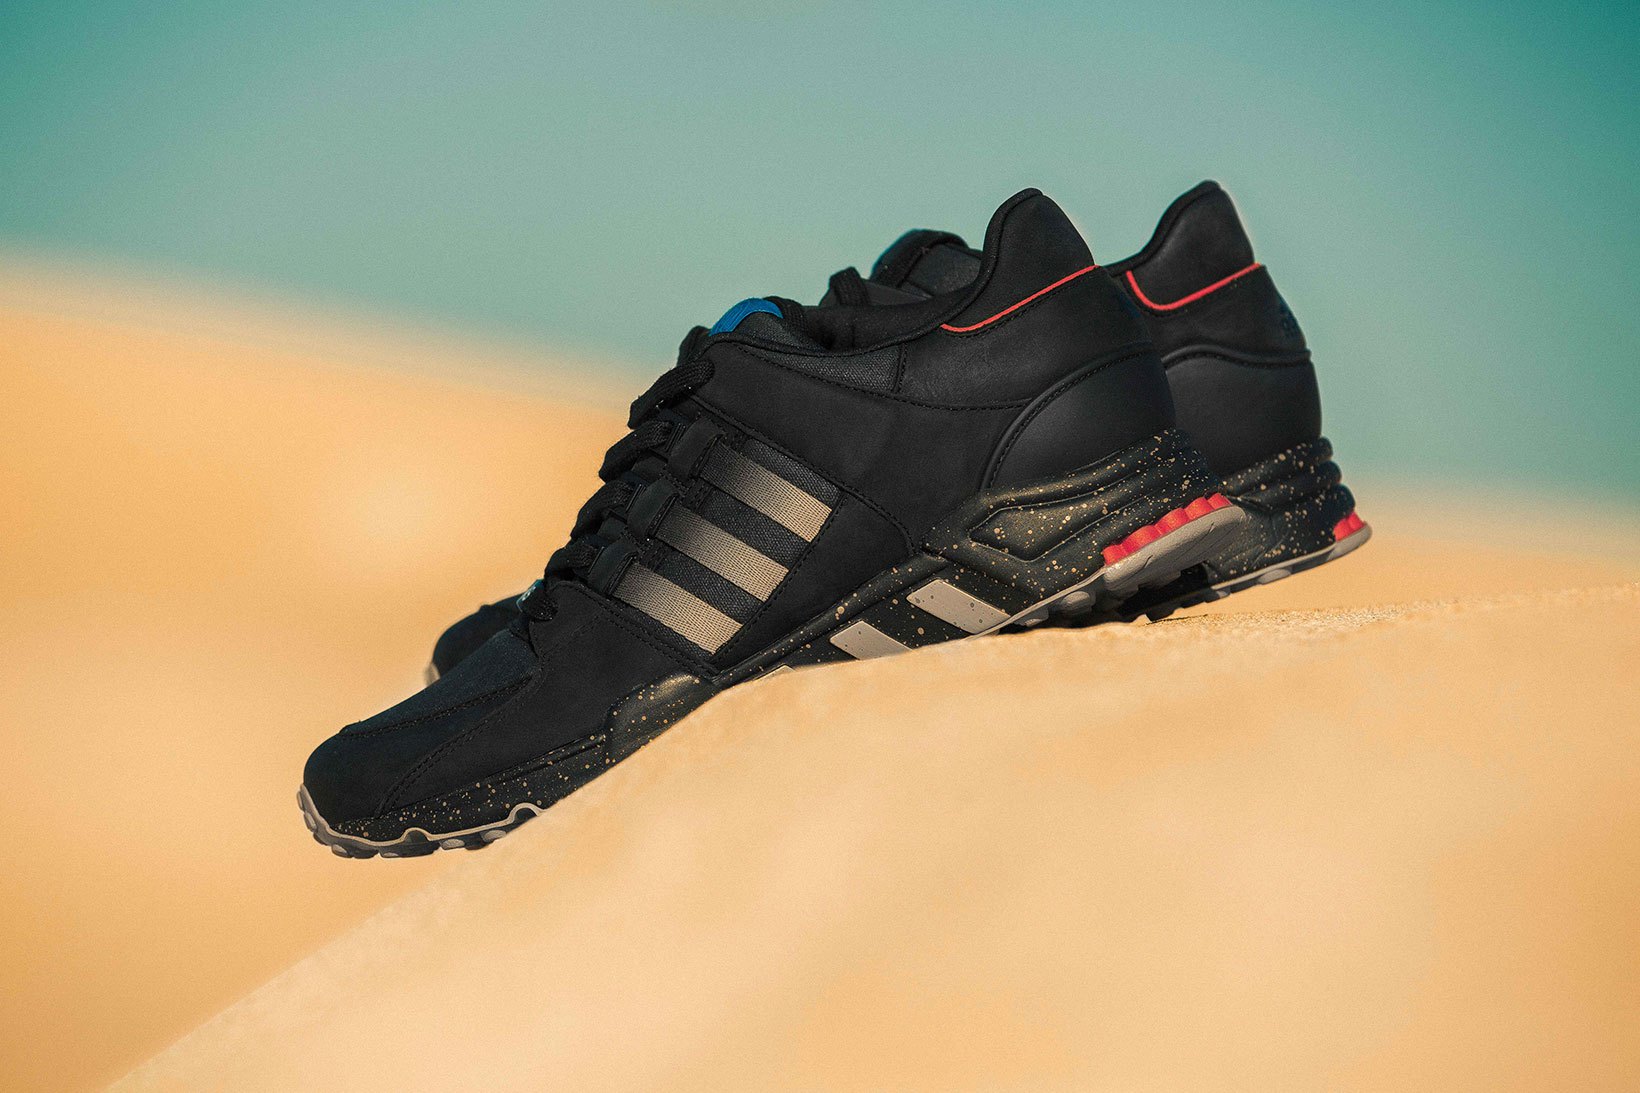 highs-and-lows-adidas-consortium-eqt-running-support-93-1